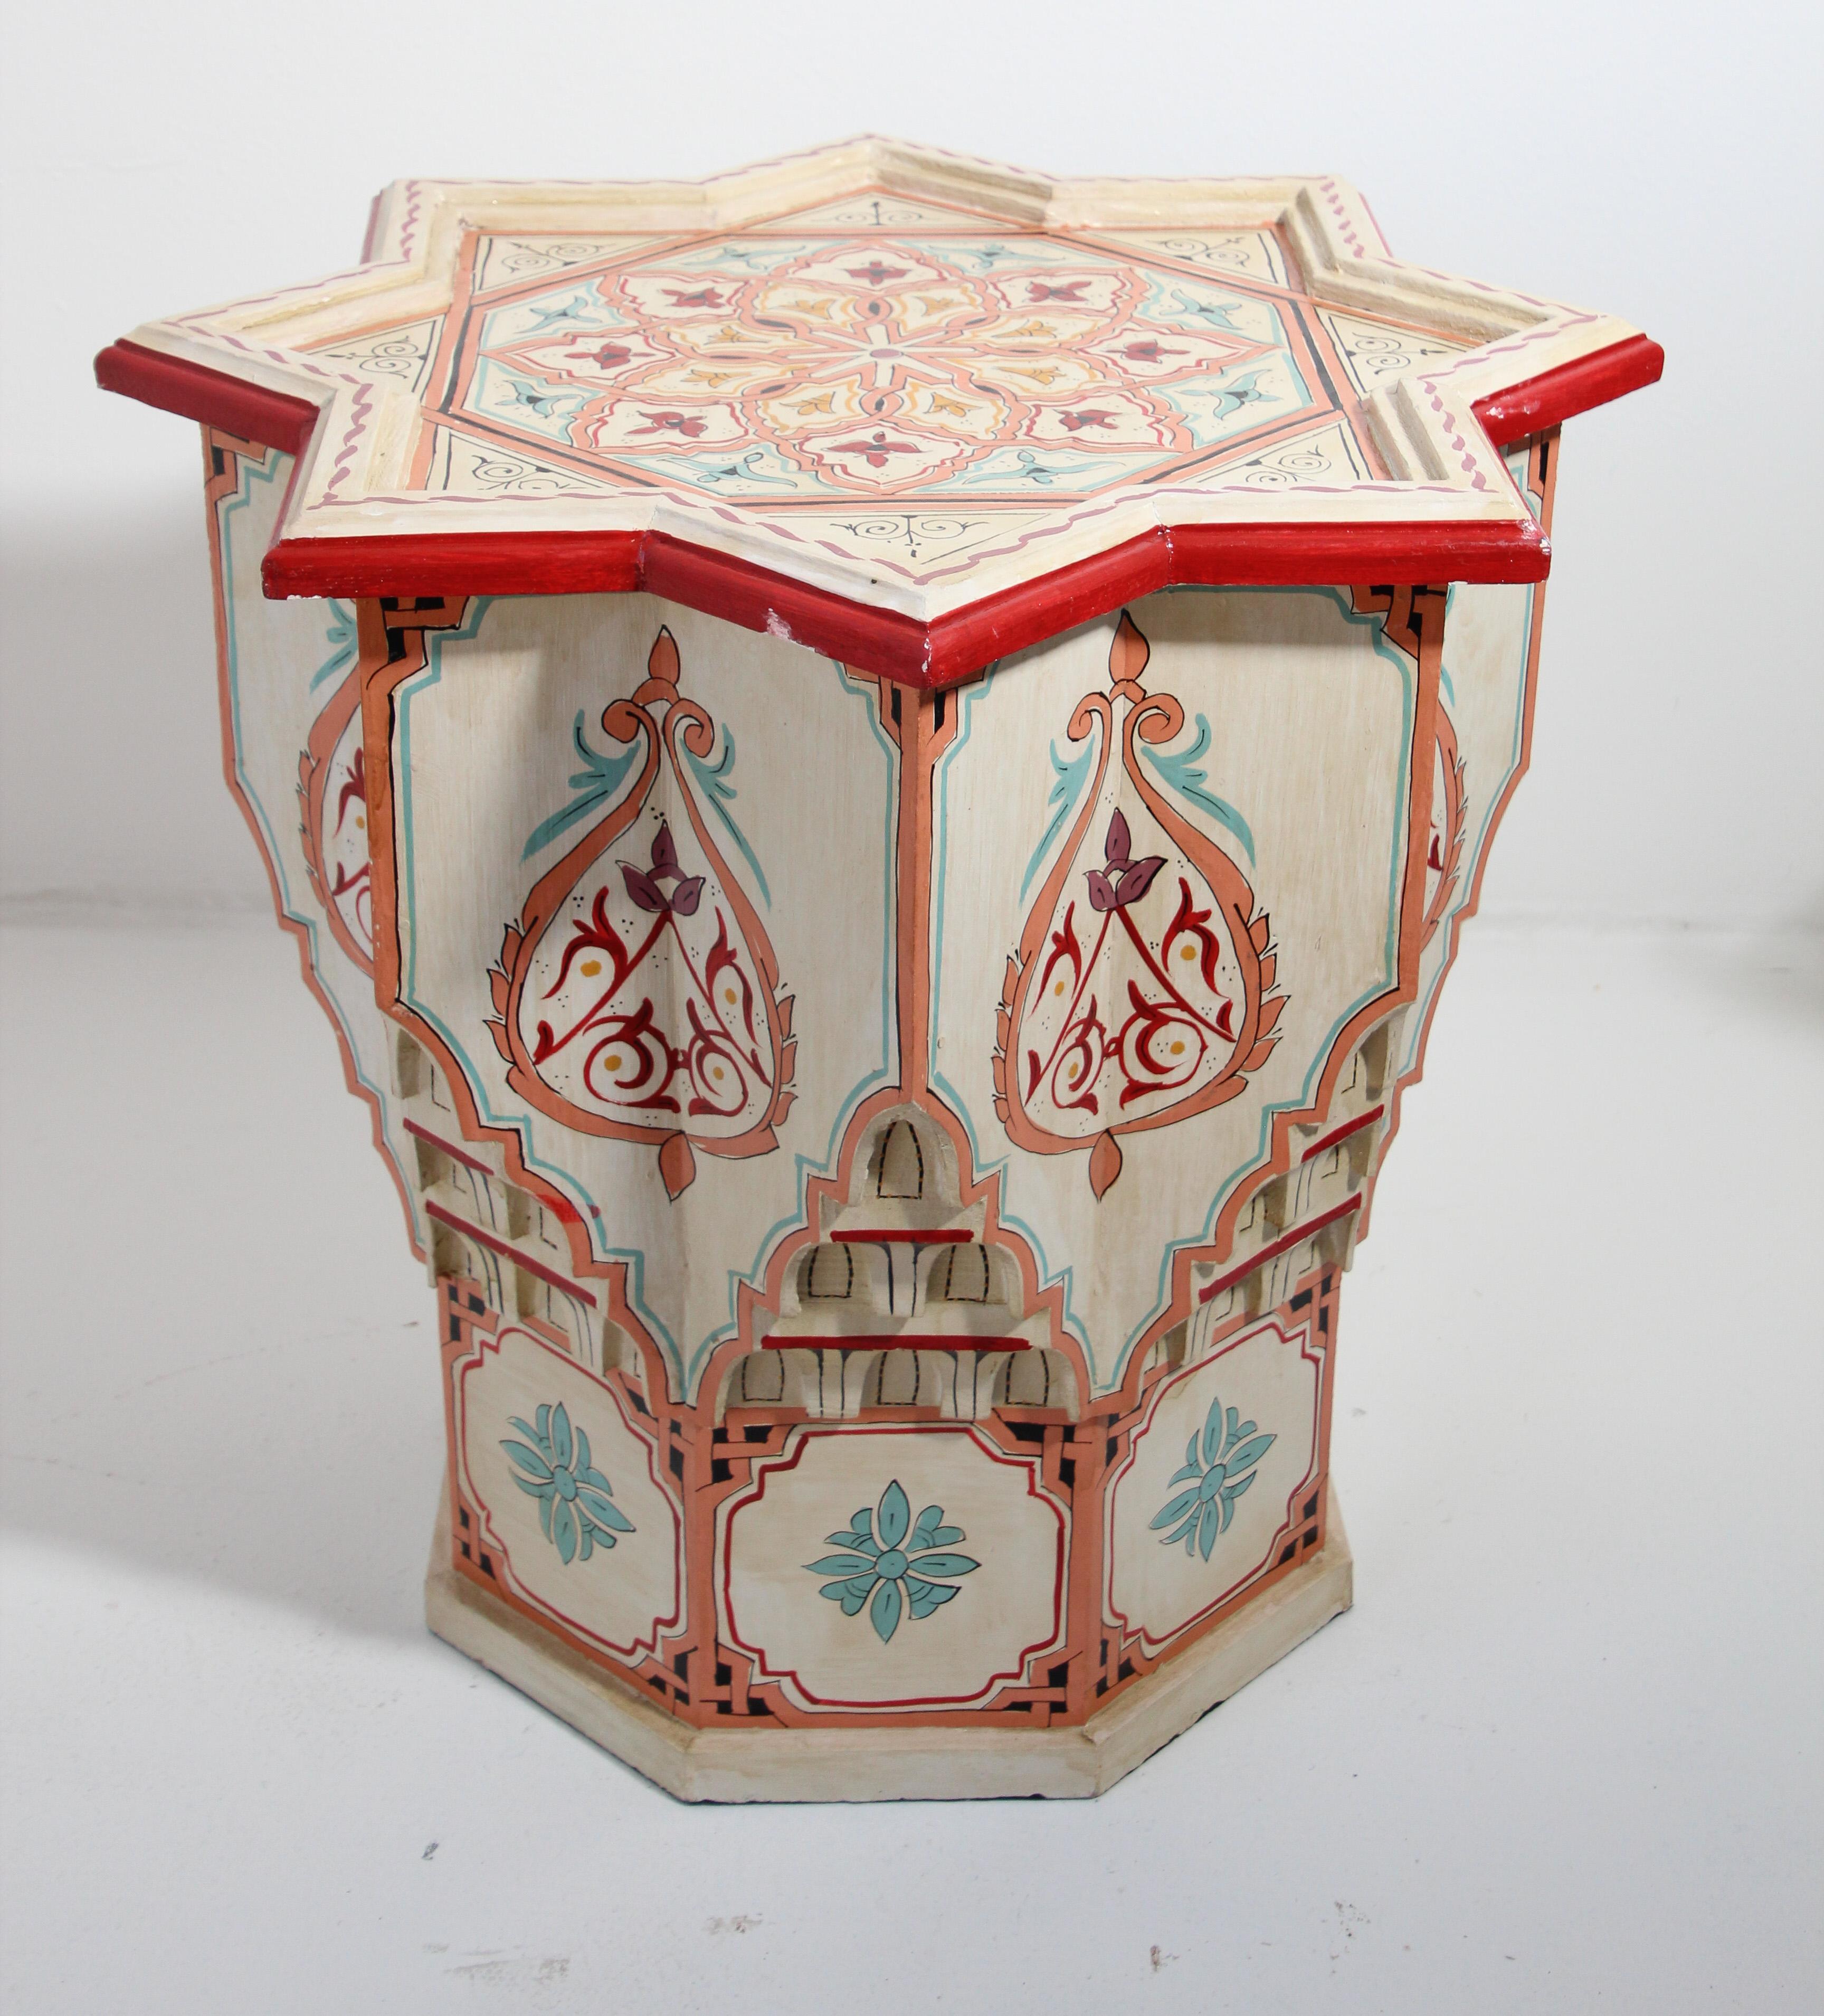 Moroccan colorful hand painted and carved side occasional white table with Moorish designs.
Pedestal table in vanilla, off white background with multicolored floral and geometric designs.
Very decorative fine artwork on a star shape top.
Hand